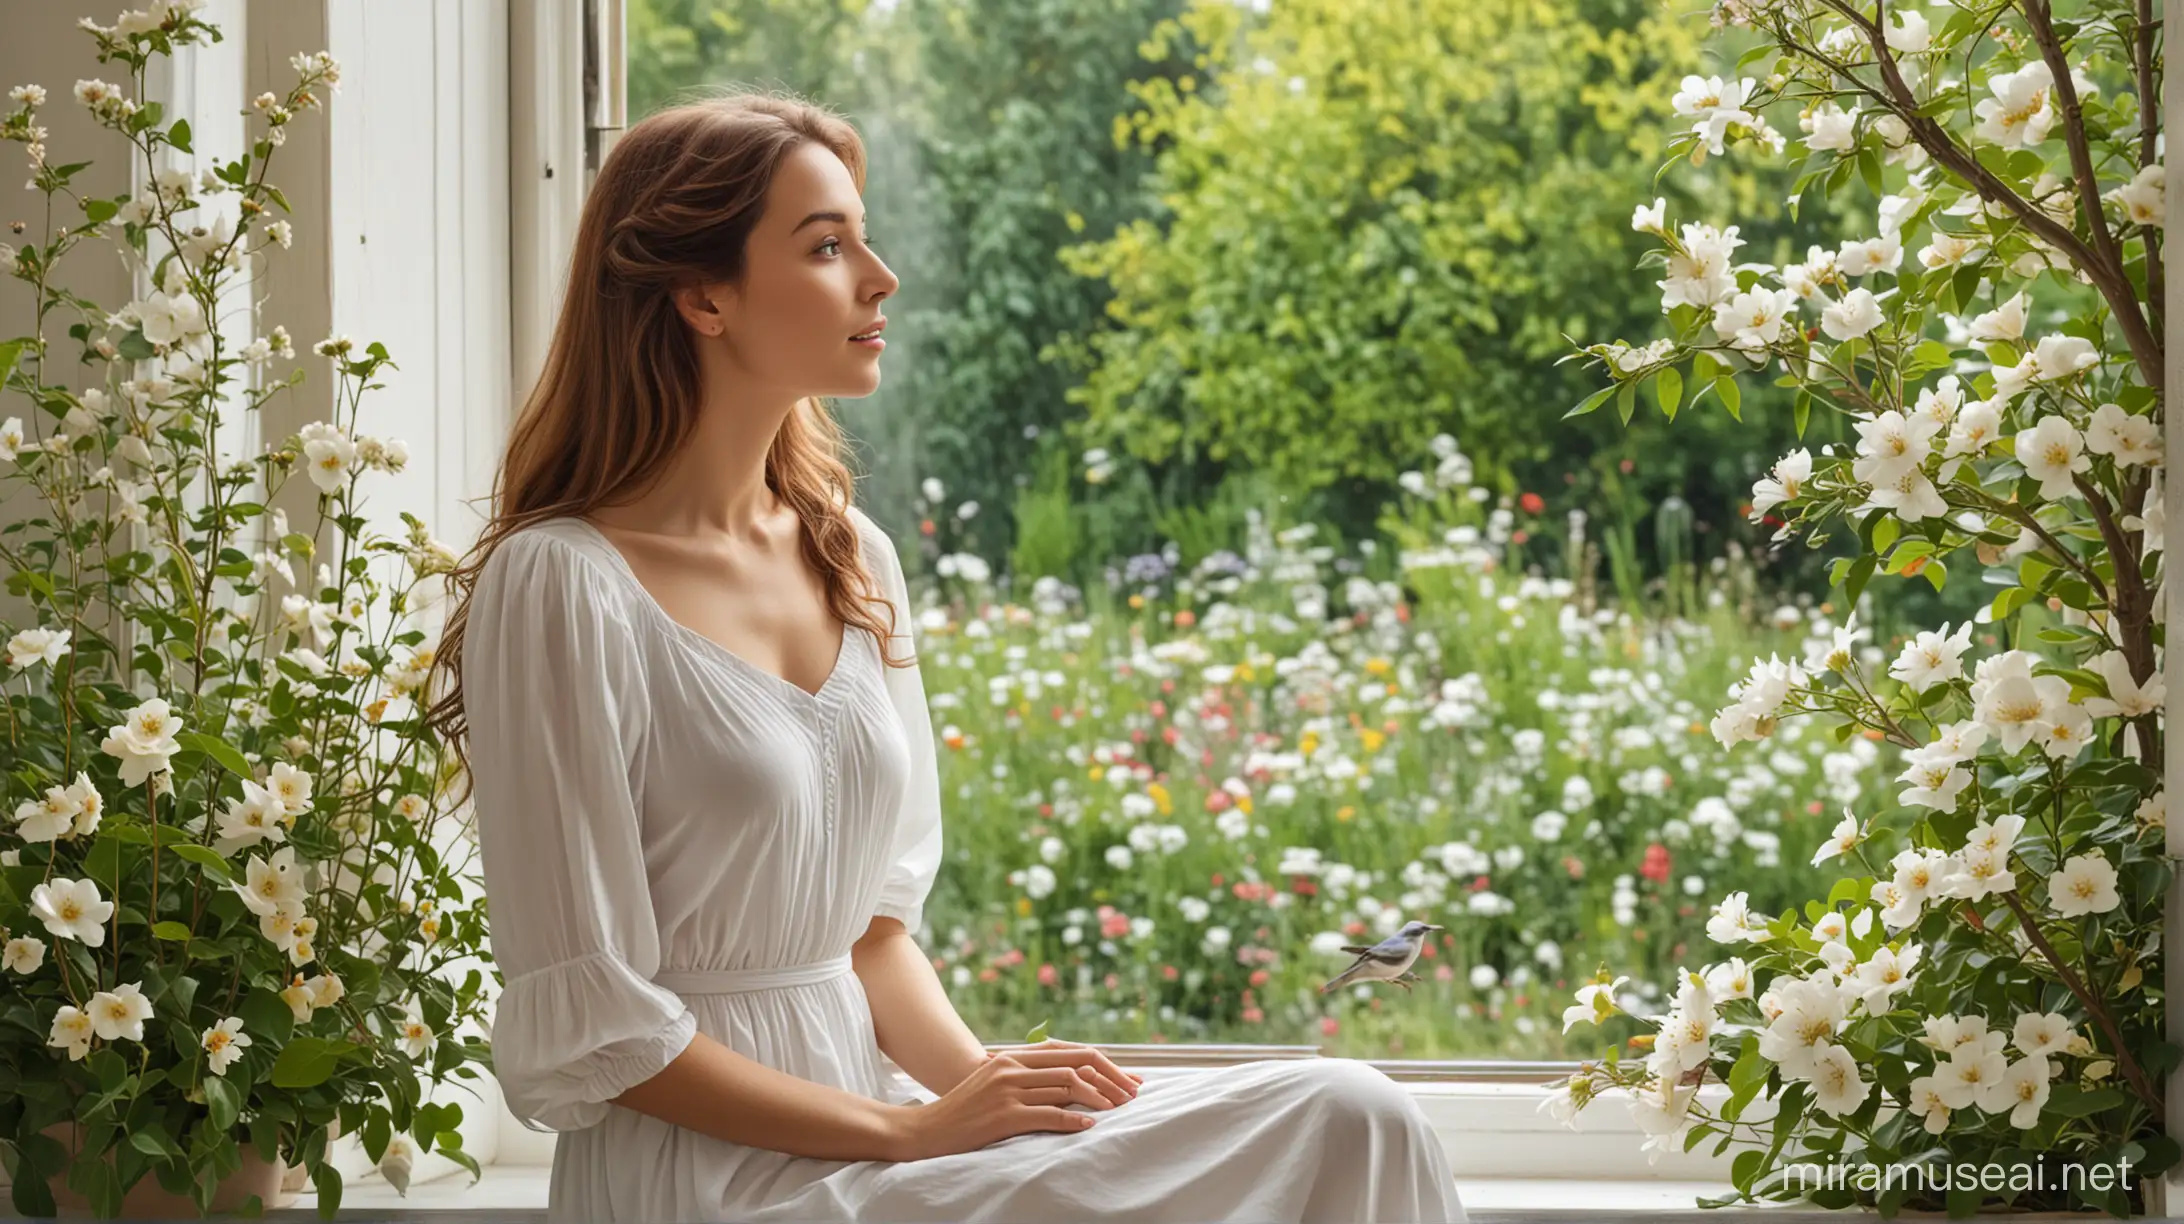 Contemplative Woman in White Dress Admiring Blooming Garden View